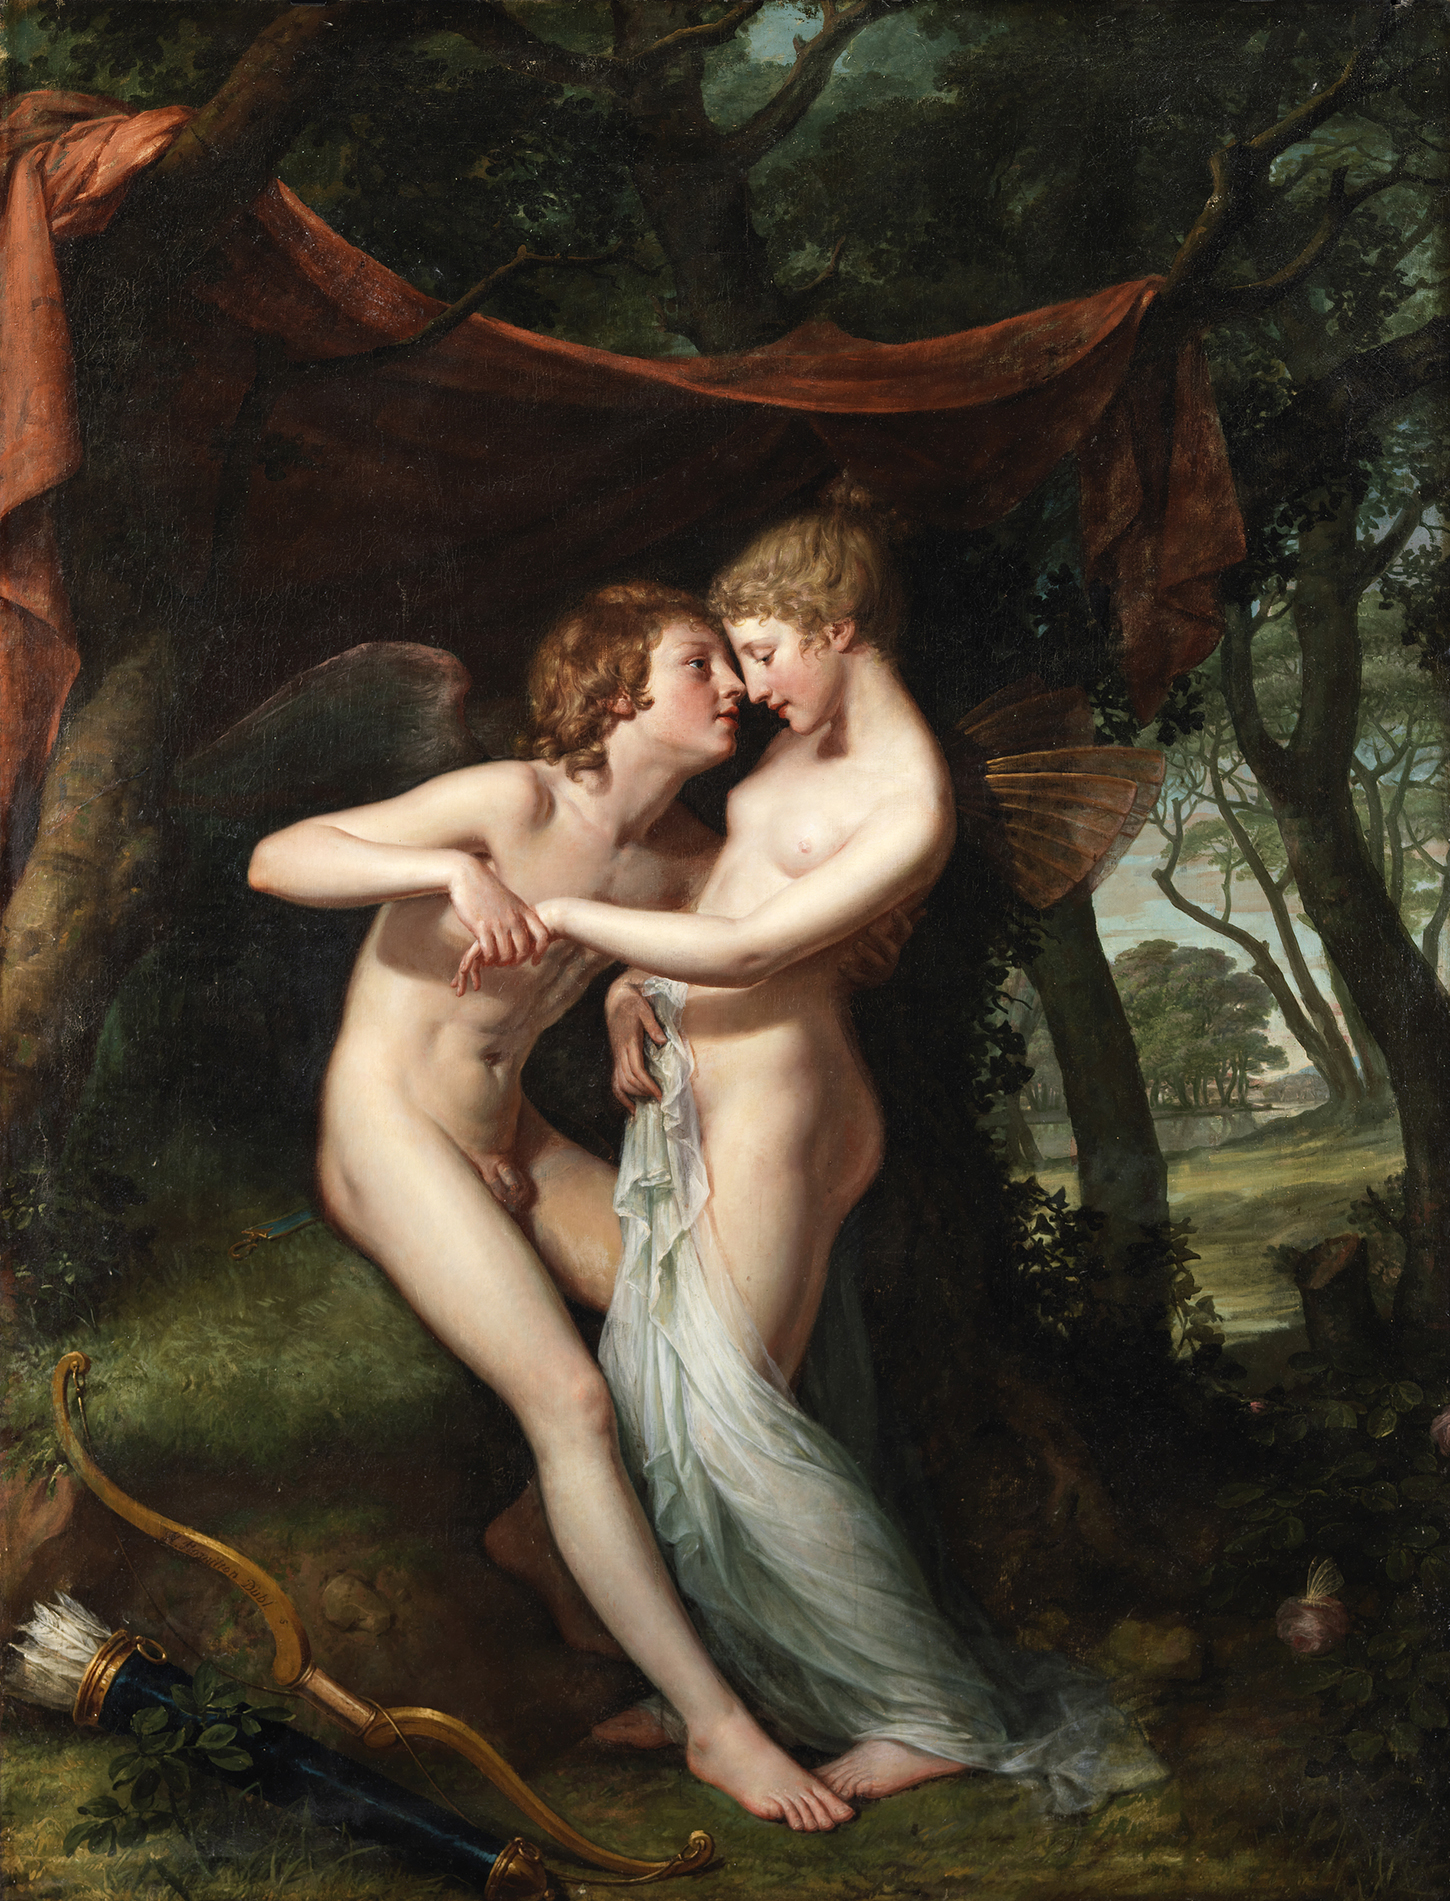 Cupid and Psyche stand in the Nuptial Bower